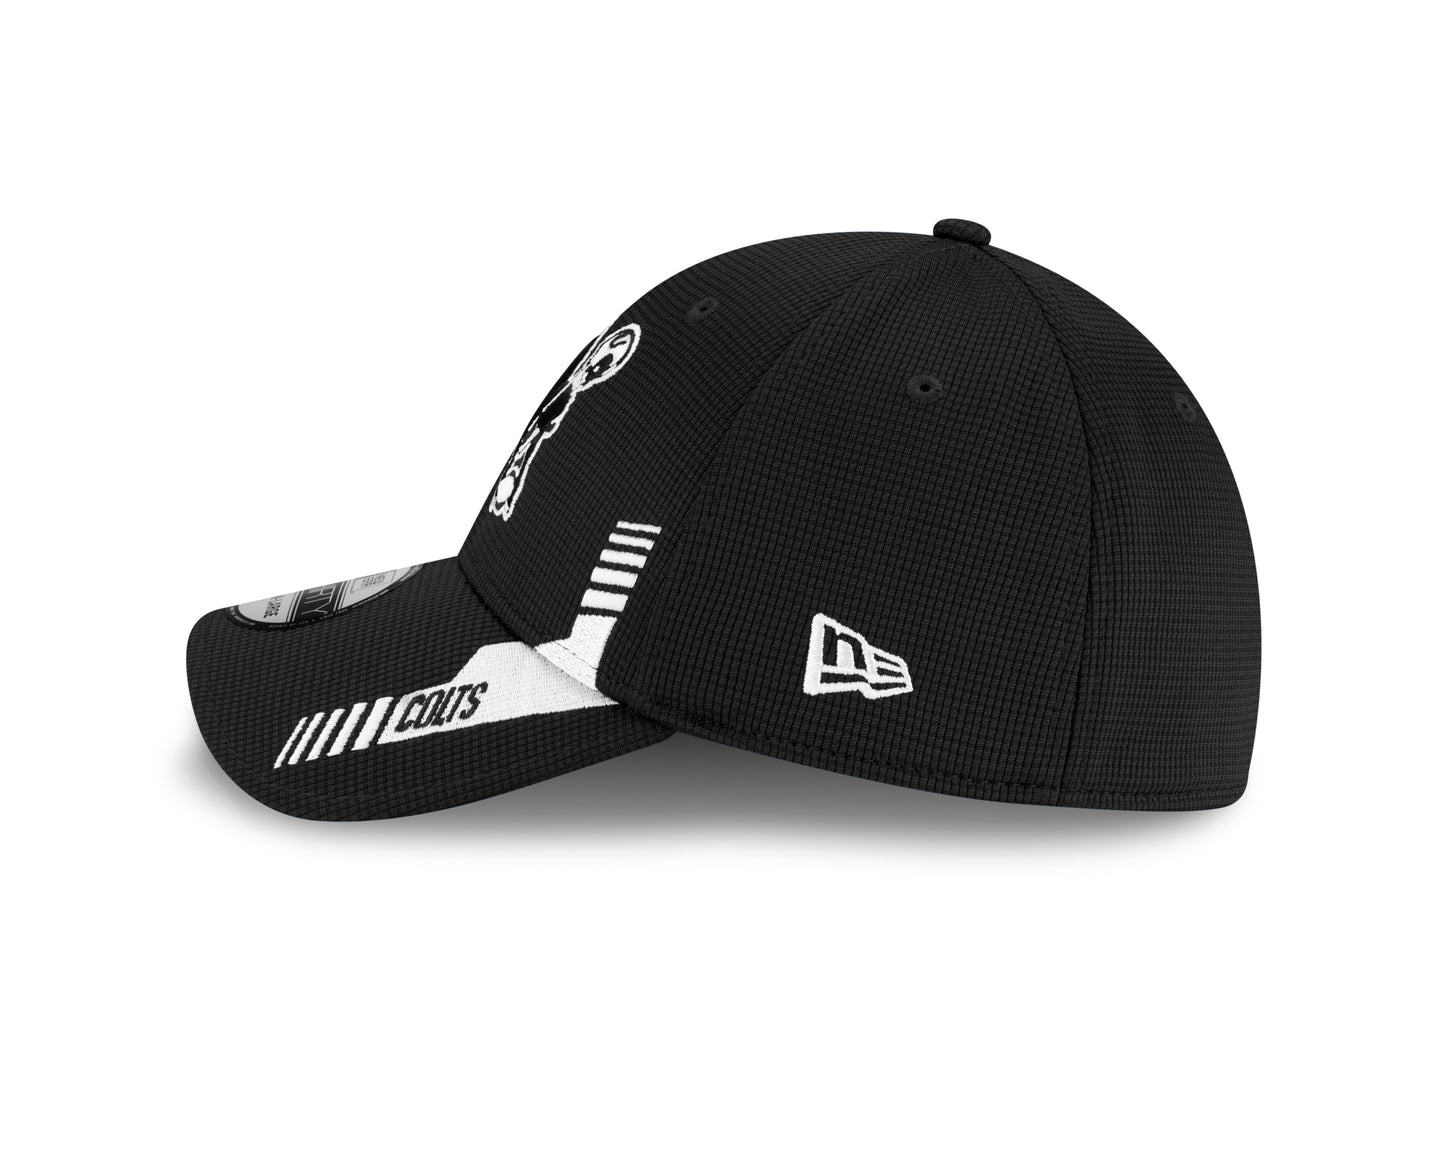 Indianapolis Colts New Era Sideline Black and White 39THIRTY Flex Hat